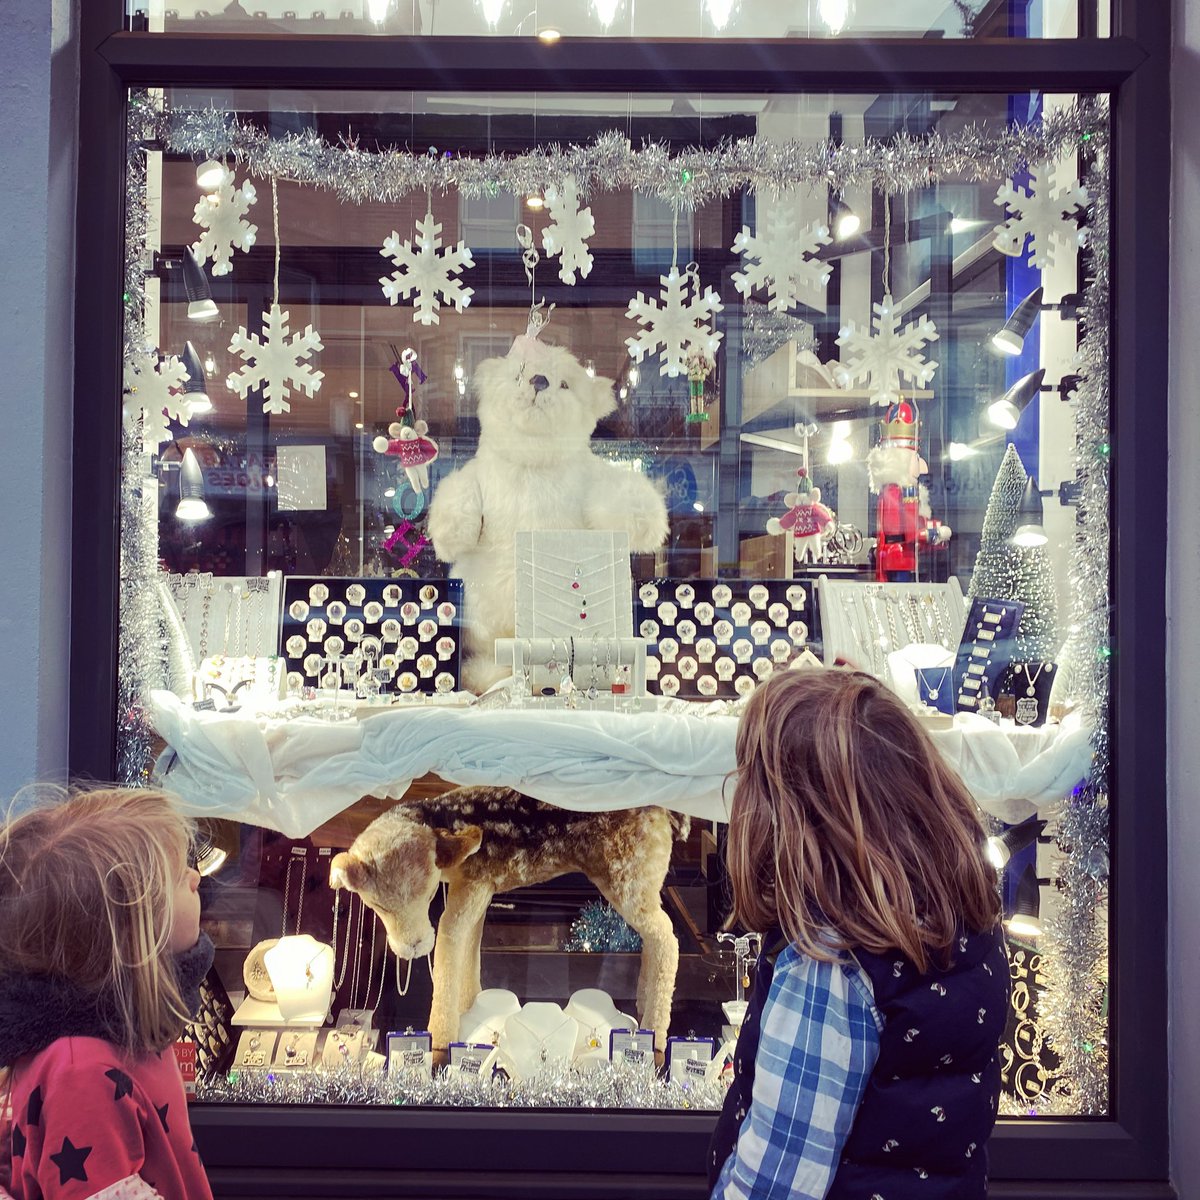 So many pretty festive ship fronts on Northdown Road. This is ST Jewellers with animatronic animals which tickled the kids. 
.
Still time to book Ballarat House and visit Margate this Christmas. 
.
We hope to see you soon 🙂
.
.
.
#margate #cliftonville #northdownroad #Christmas